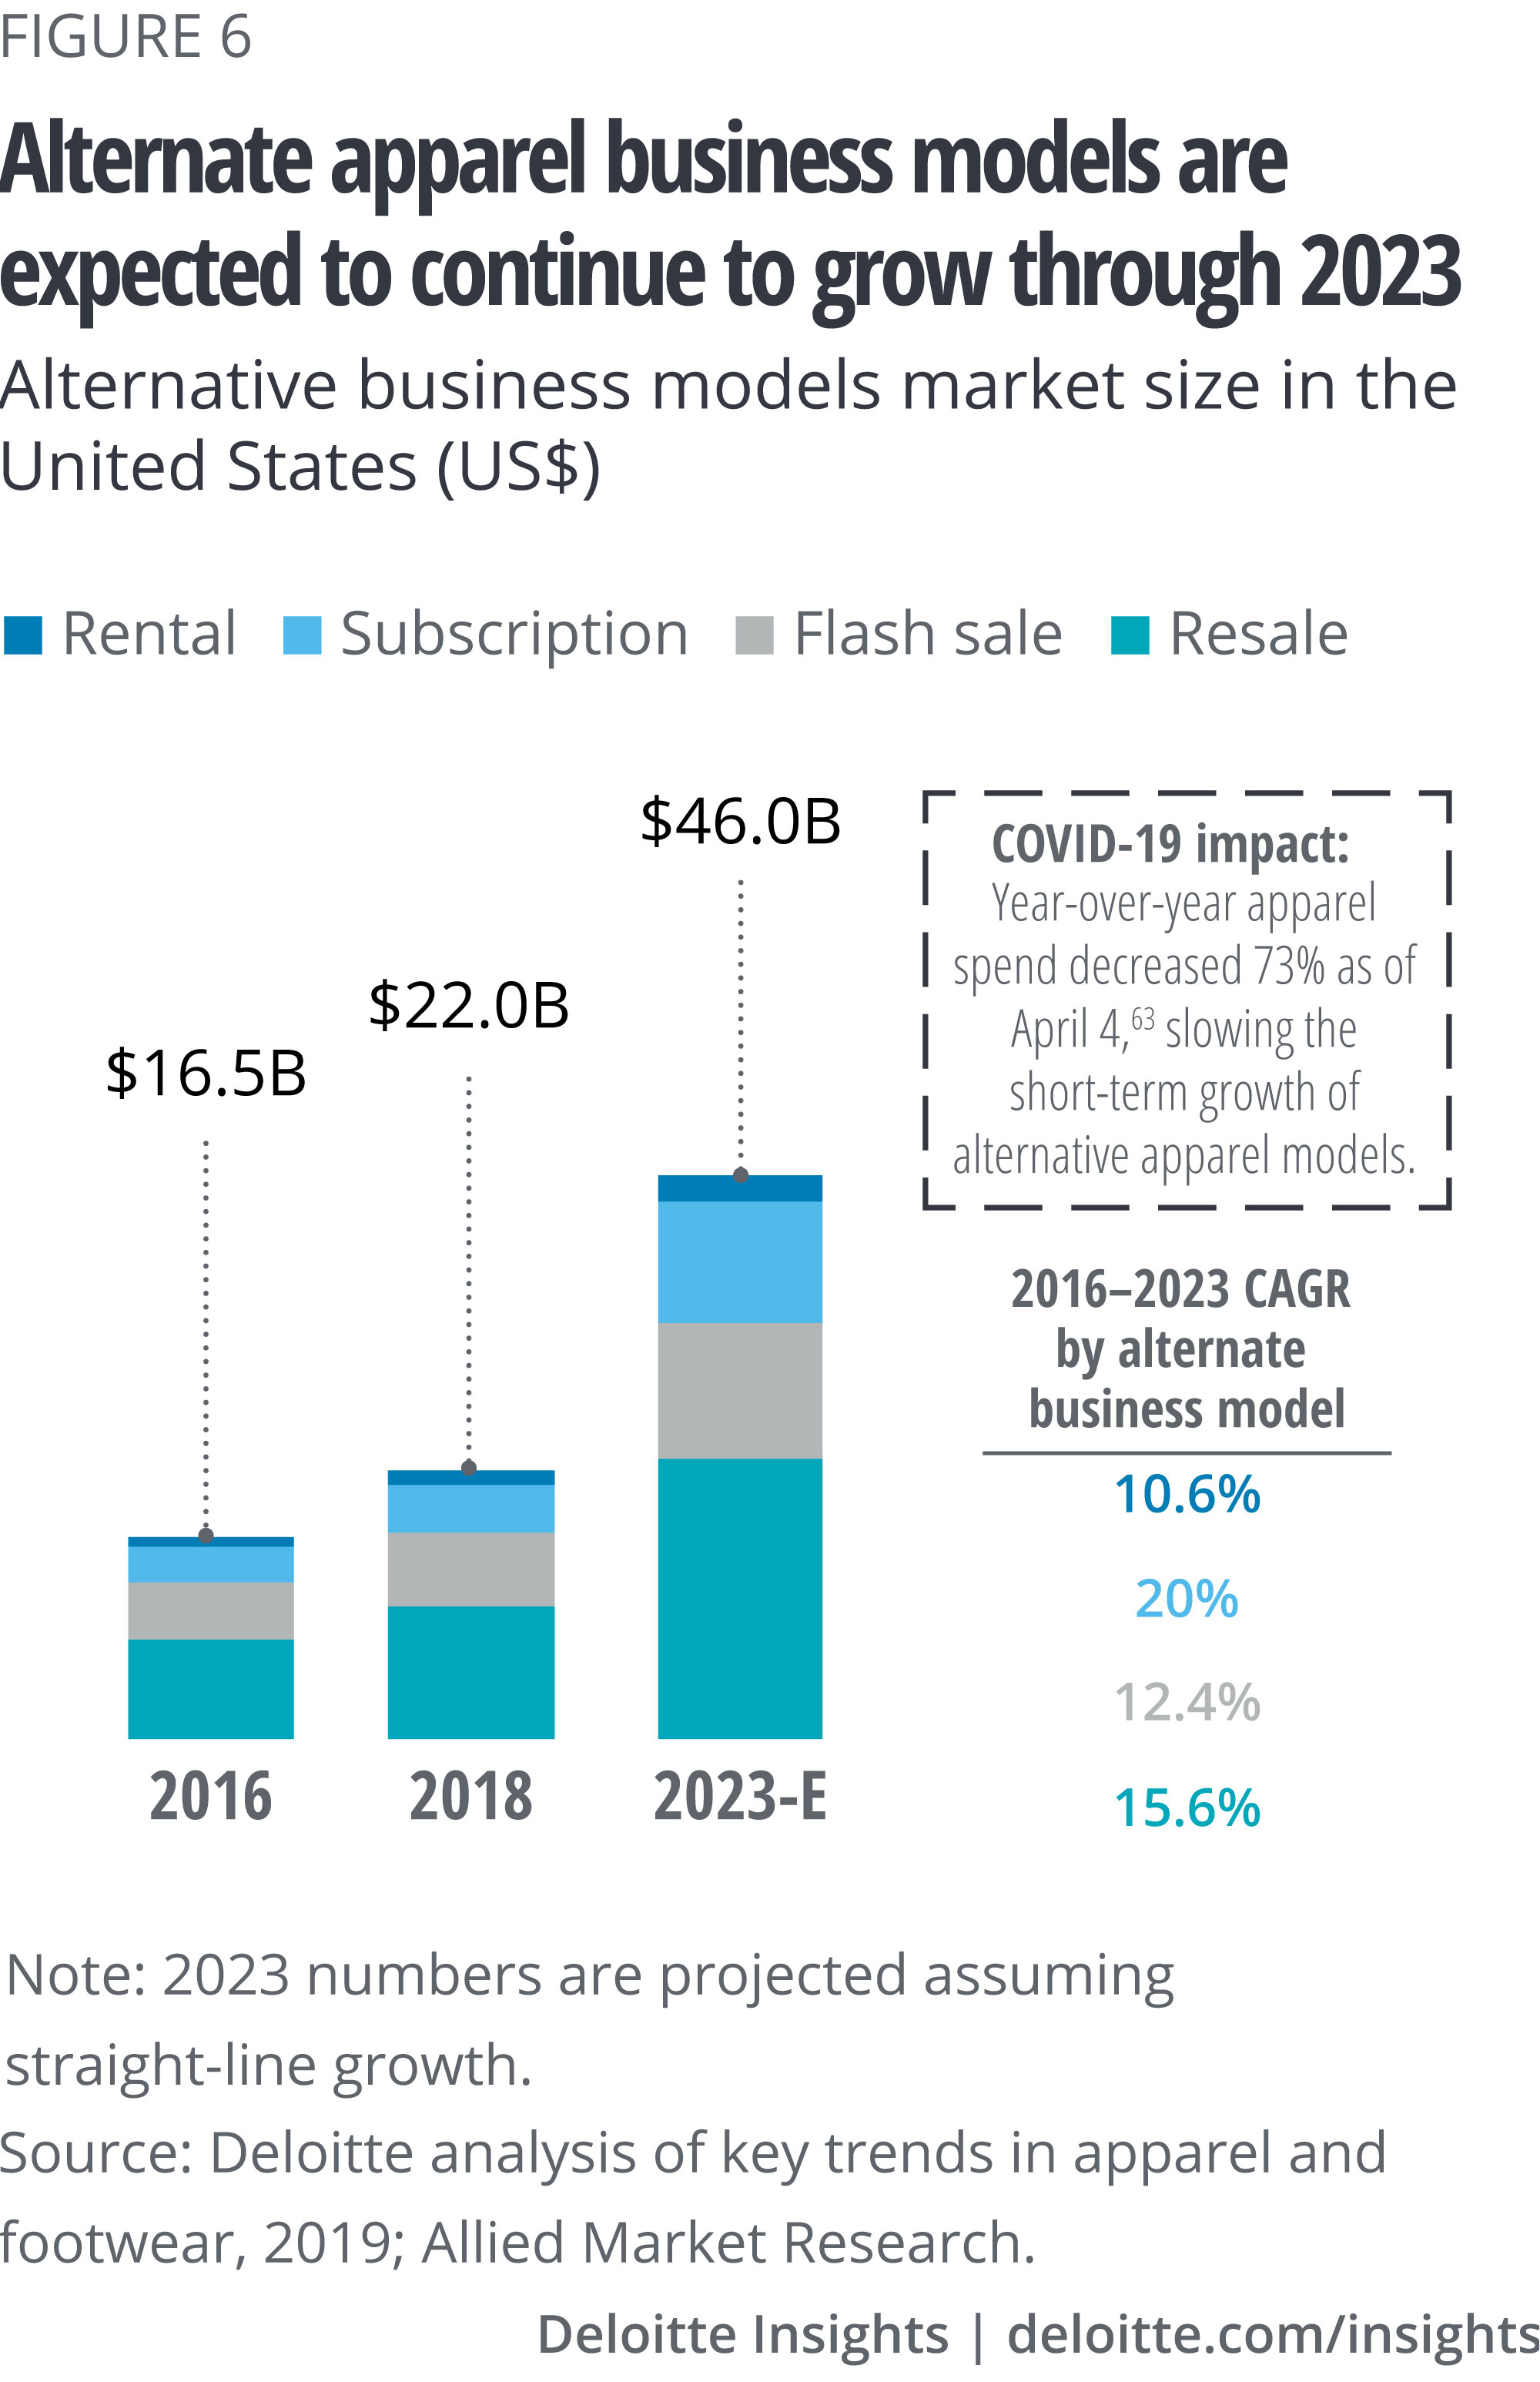 Alternative business models in apparel are expected to continue to grow through 2023